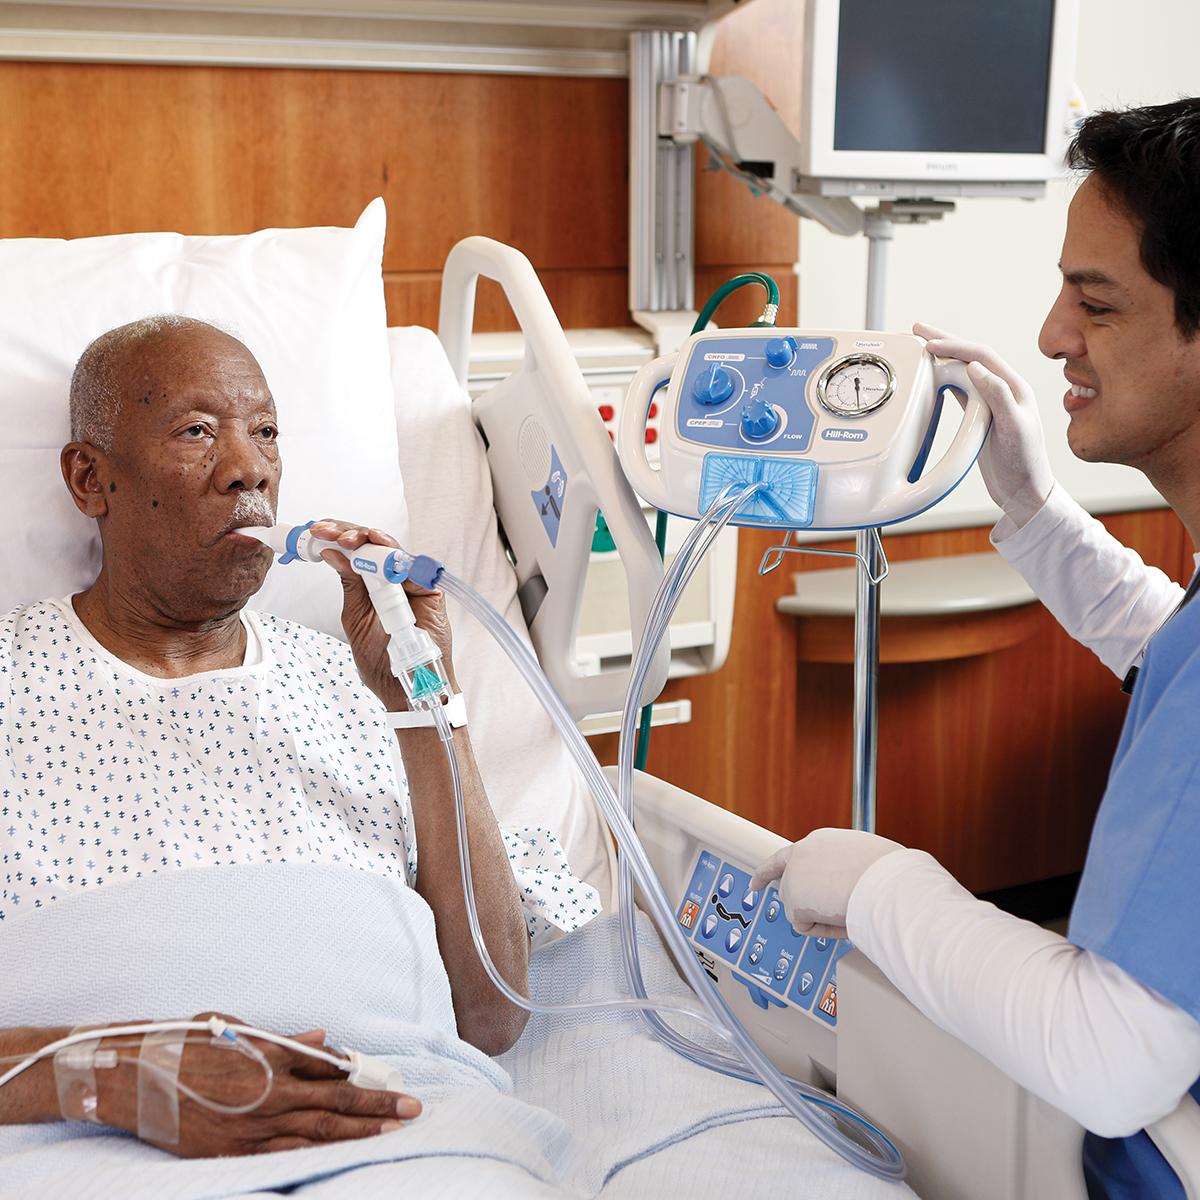 An older patient in a hospital bed receives therapy from the MetaNeb system, his clinician nearby